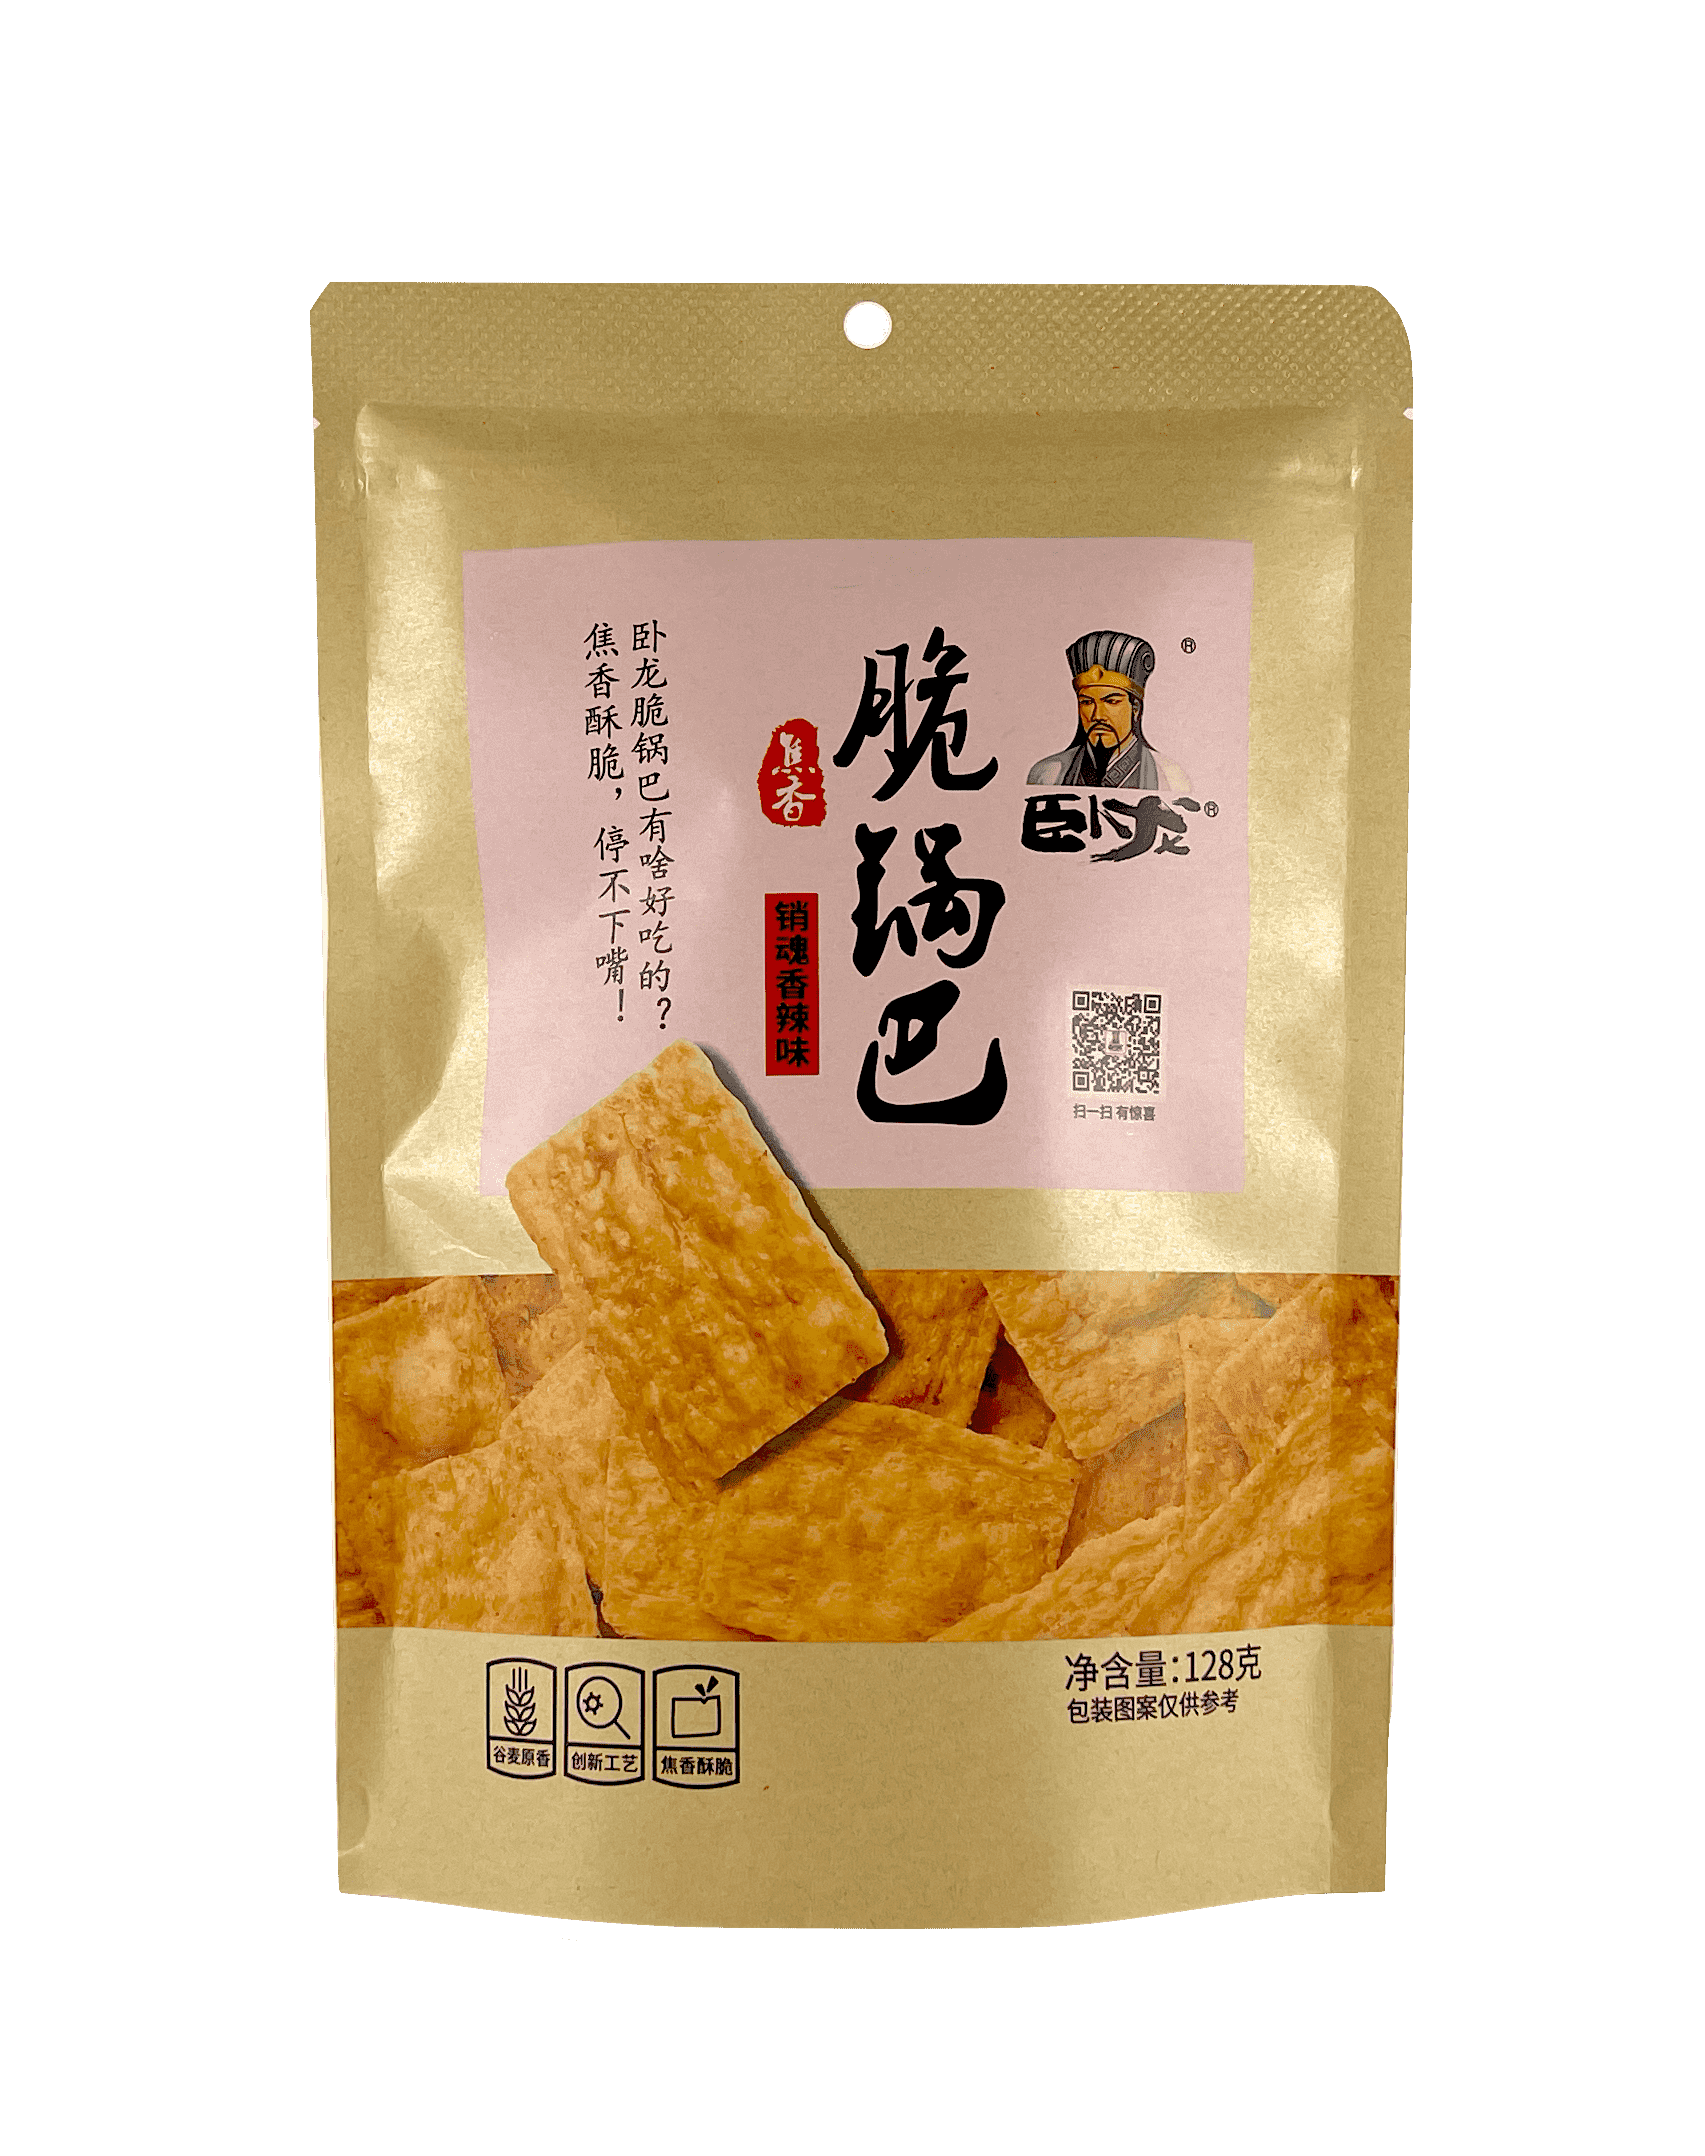 Rice Cracker Spicy Flavour 128g SHXL Wolong China